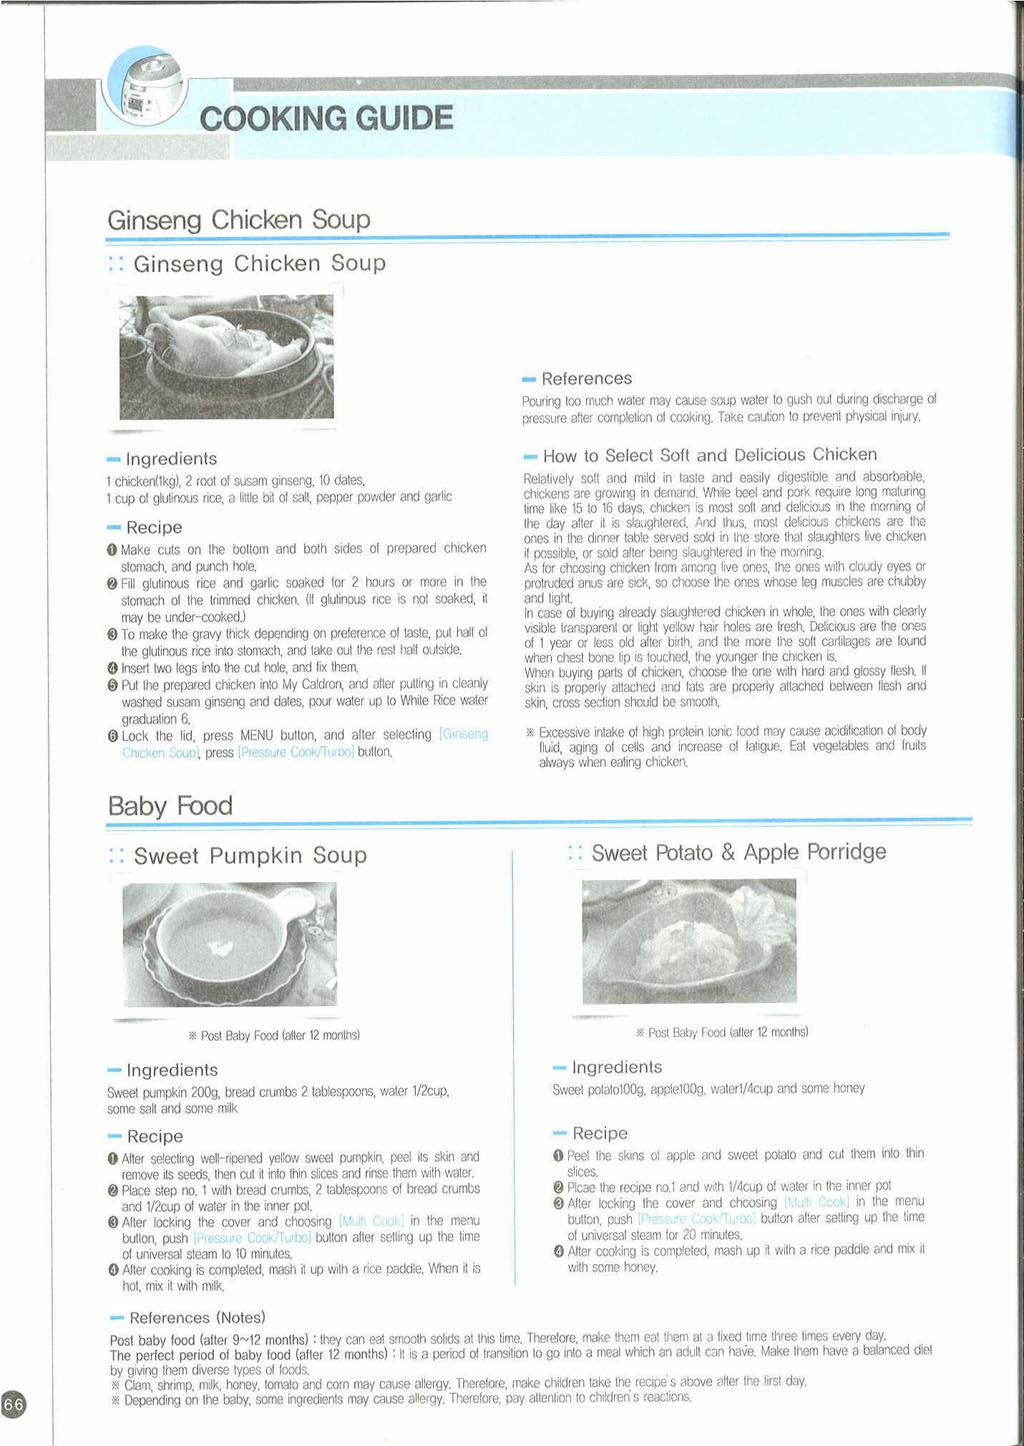 My Cuckoo Rice Cooker: Scanned Cuckoo English Recipe and Cooking Guide ...